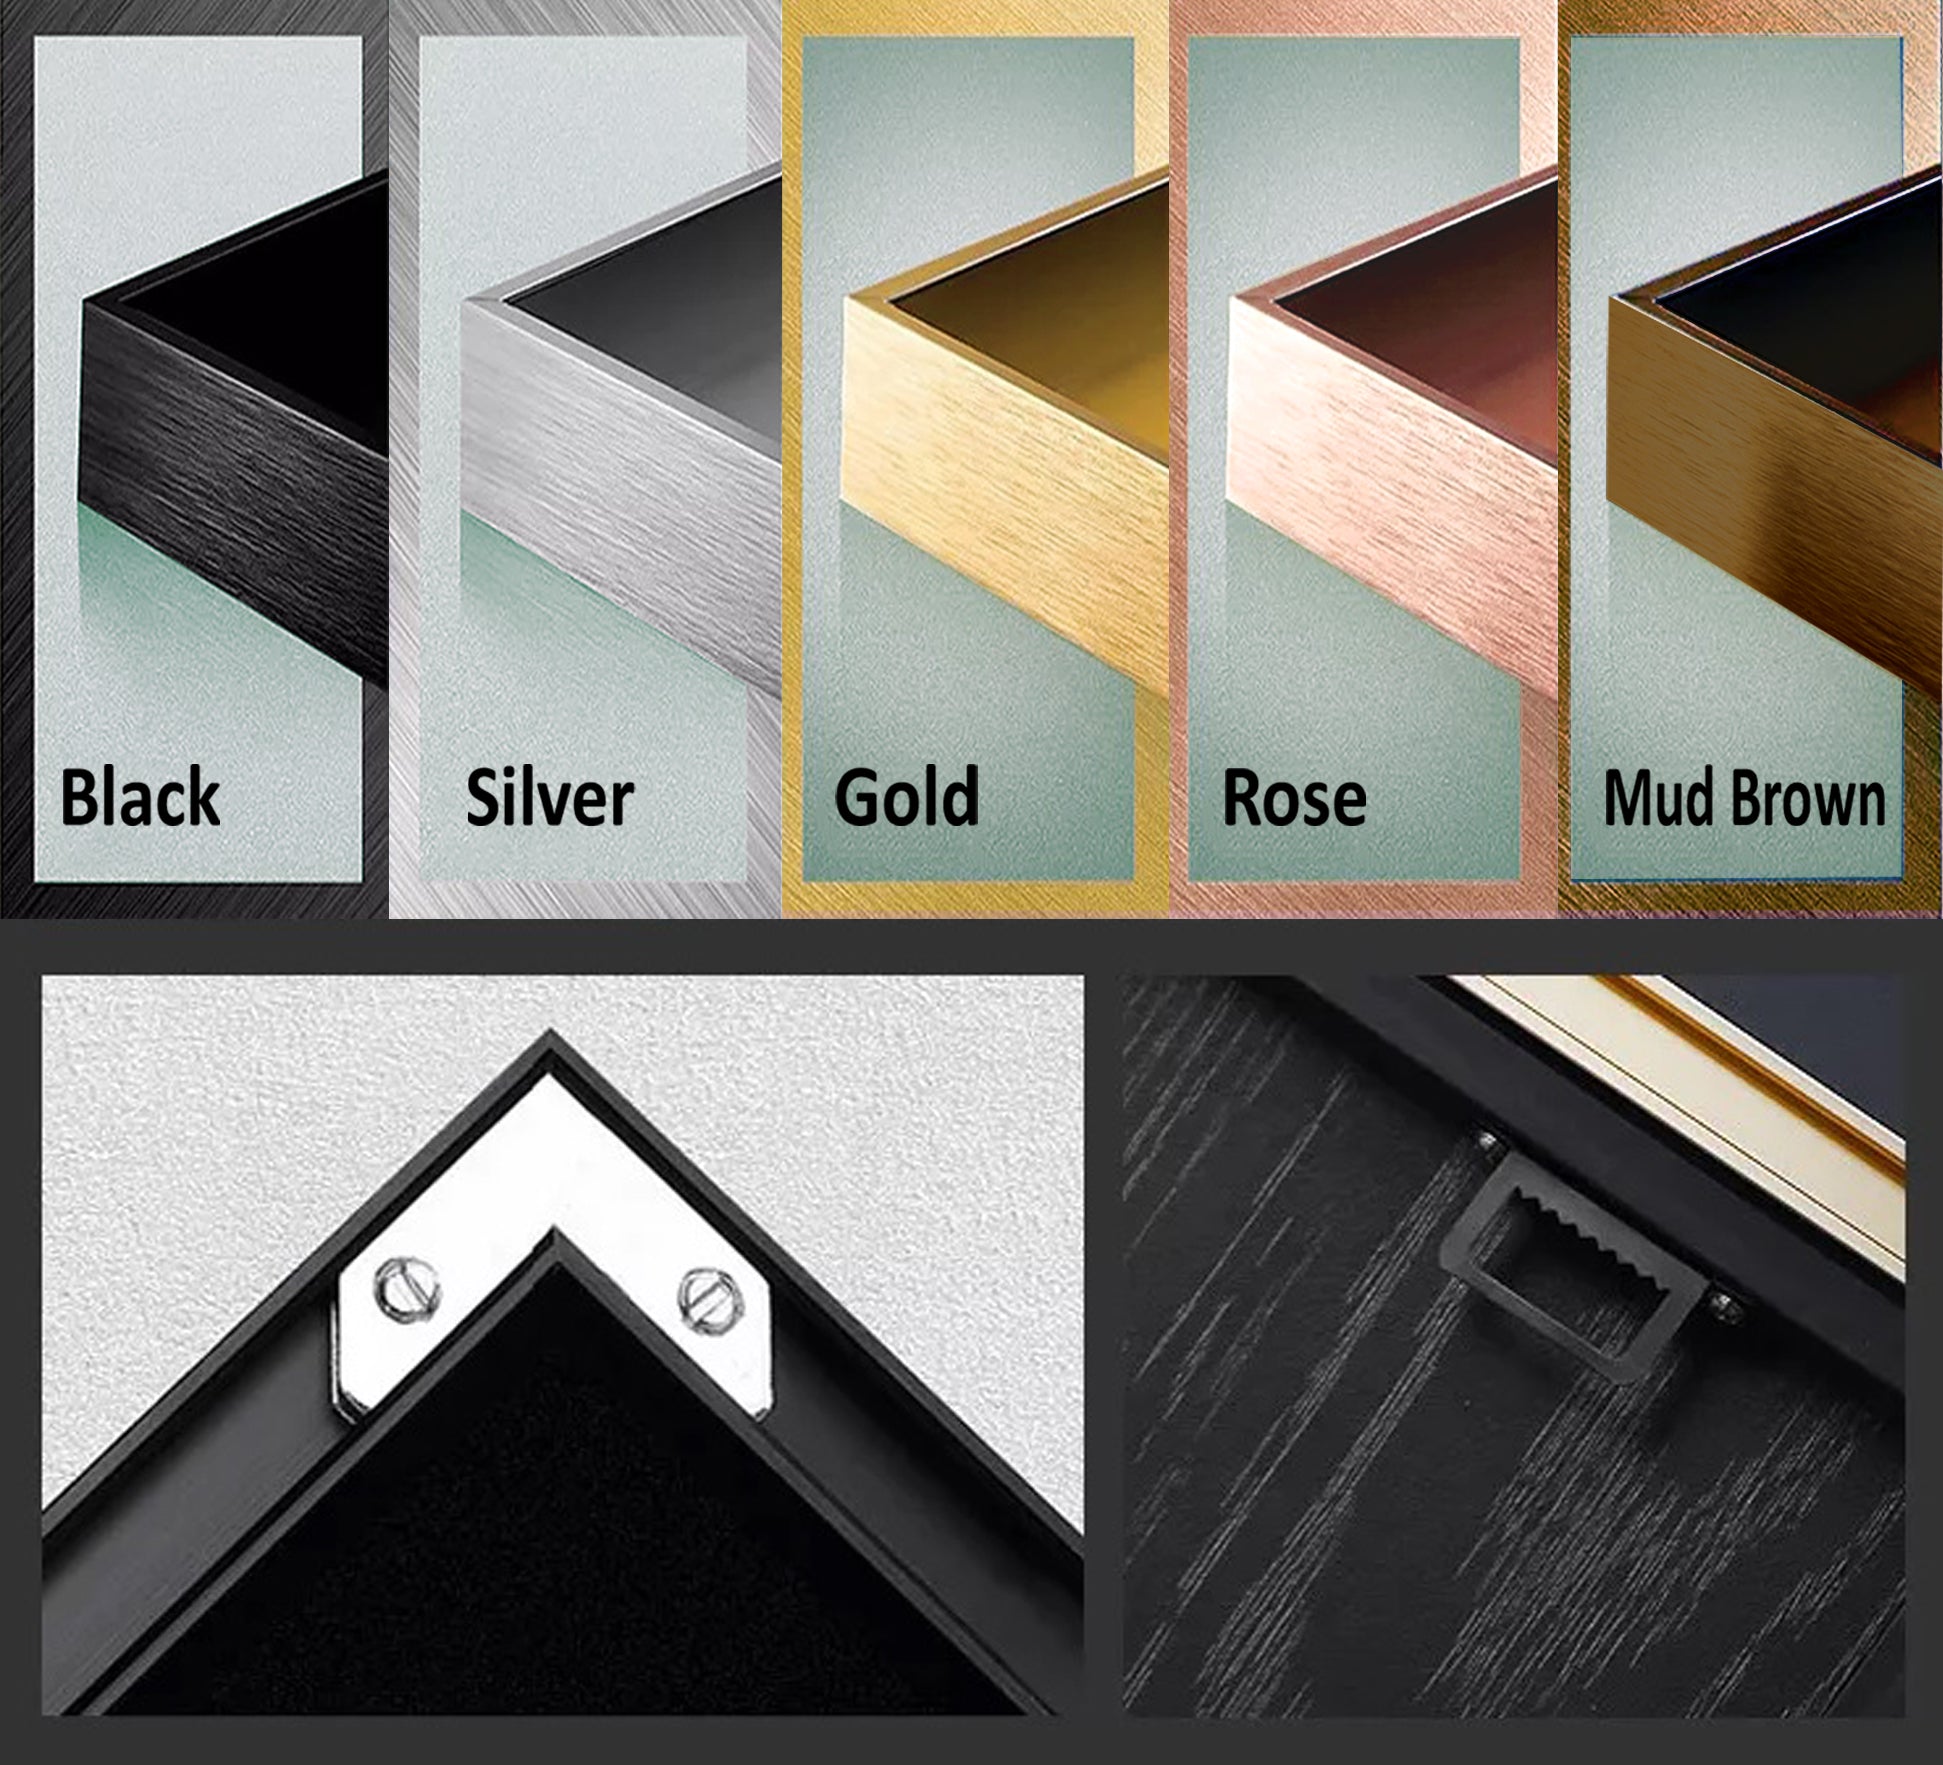 a series of photos showing different types of metal